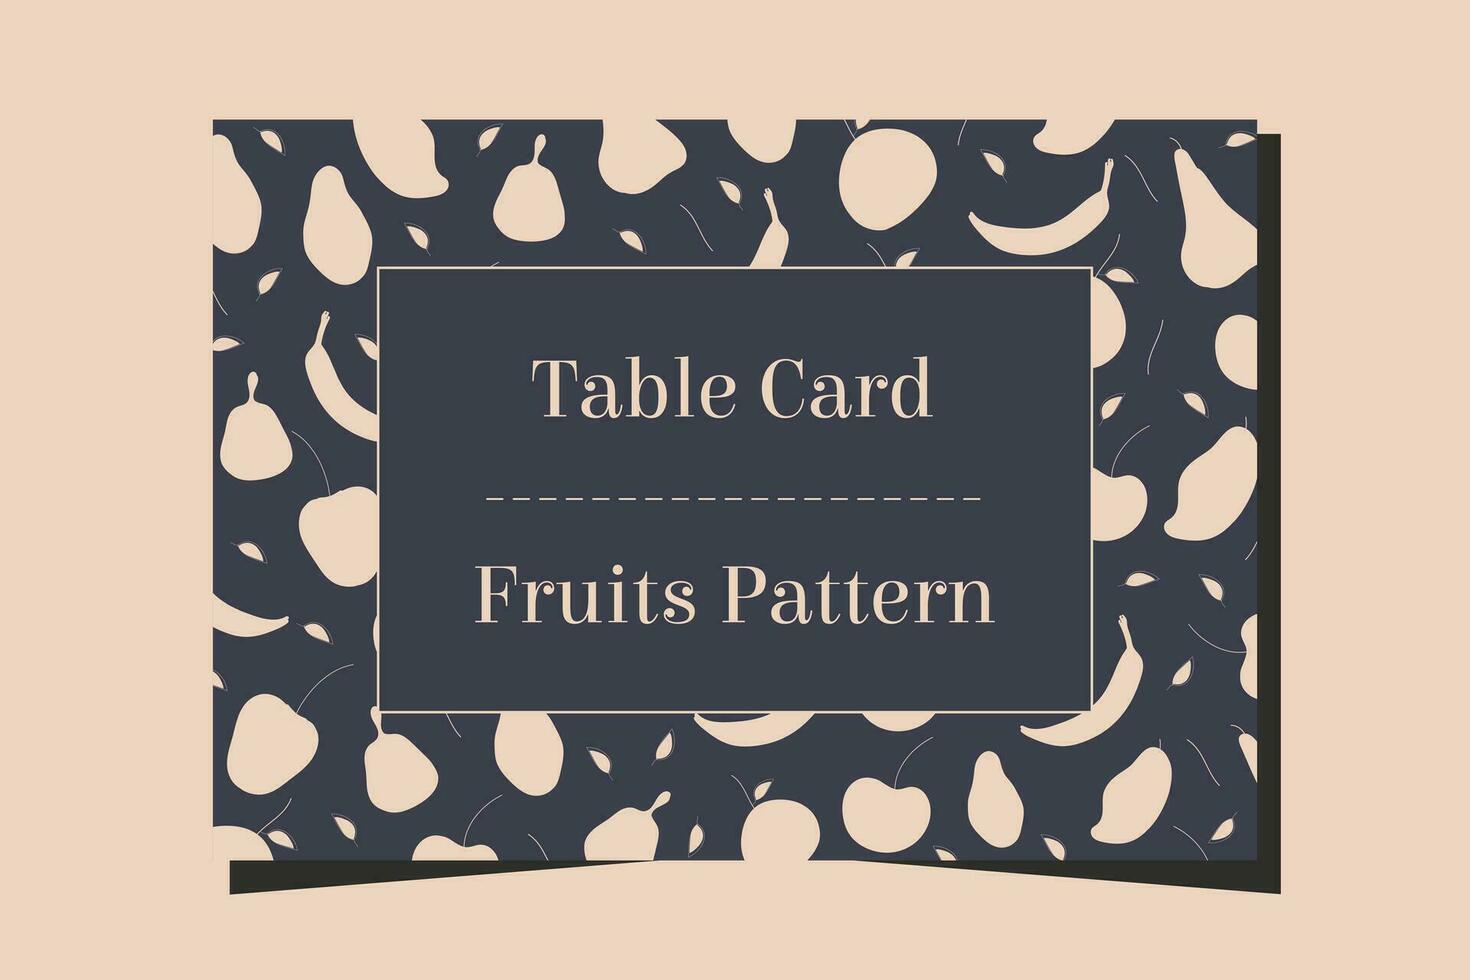 Table card seat number wedding or ceremony event with fruits pattern gastronomy food design. vector